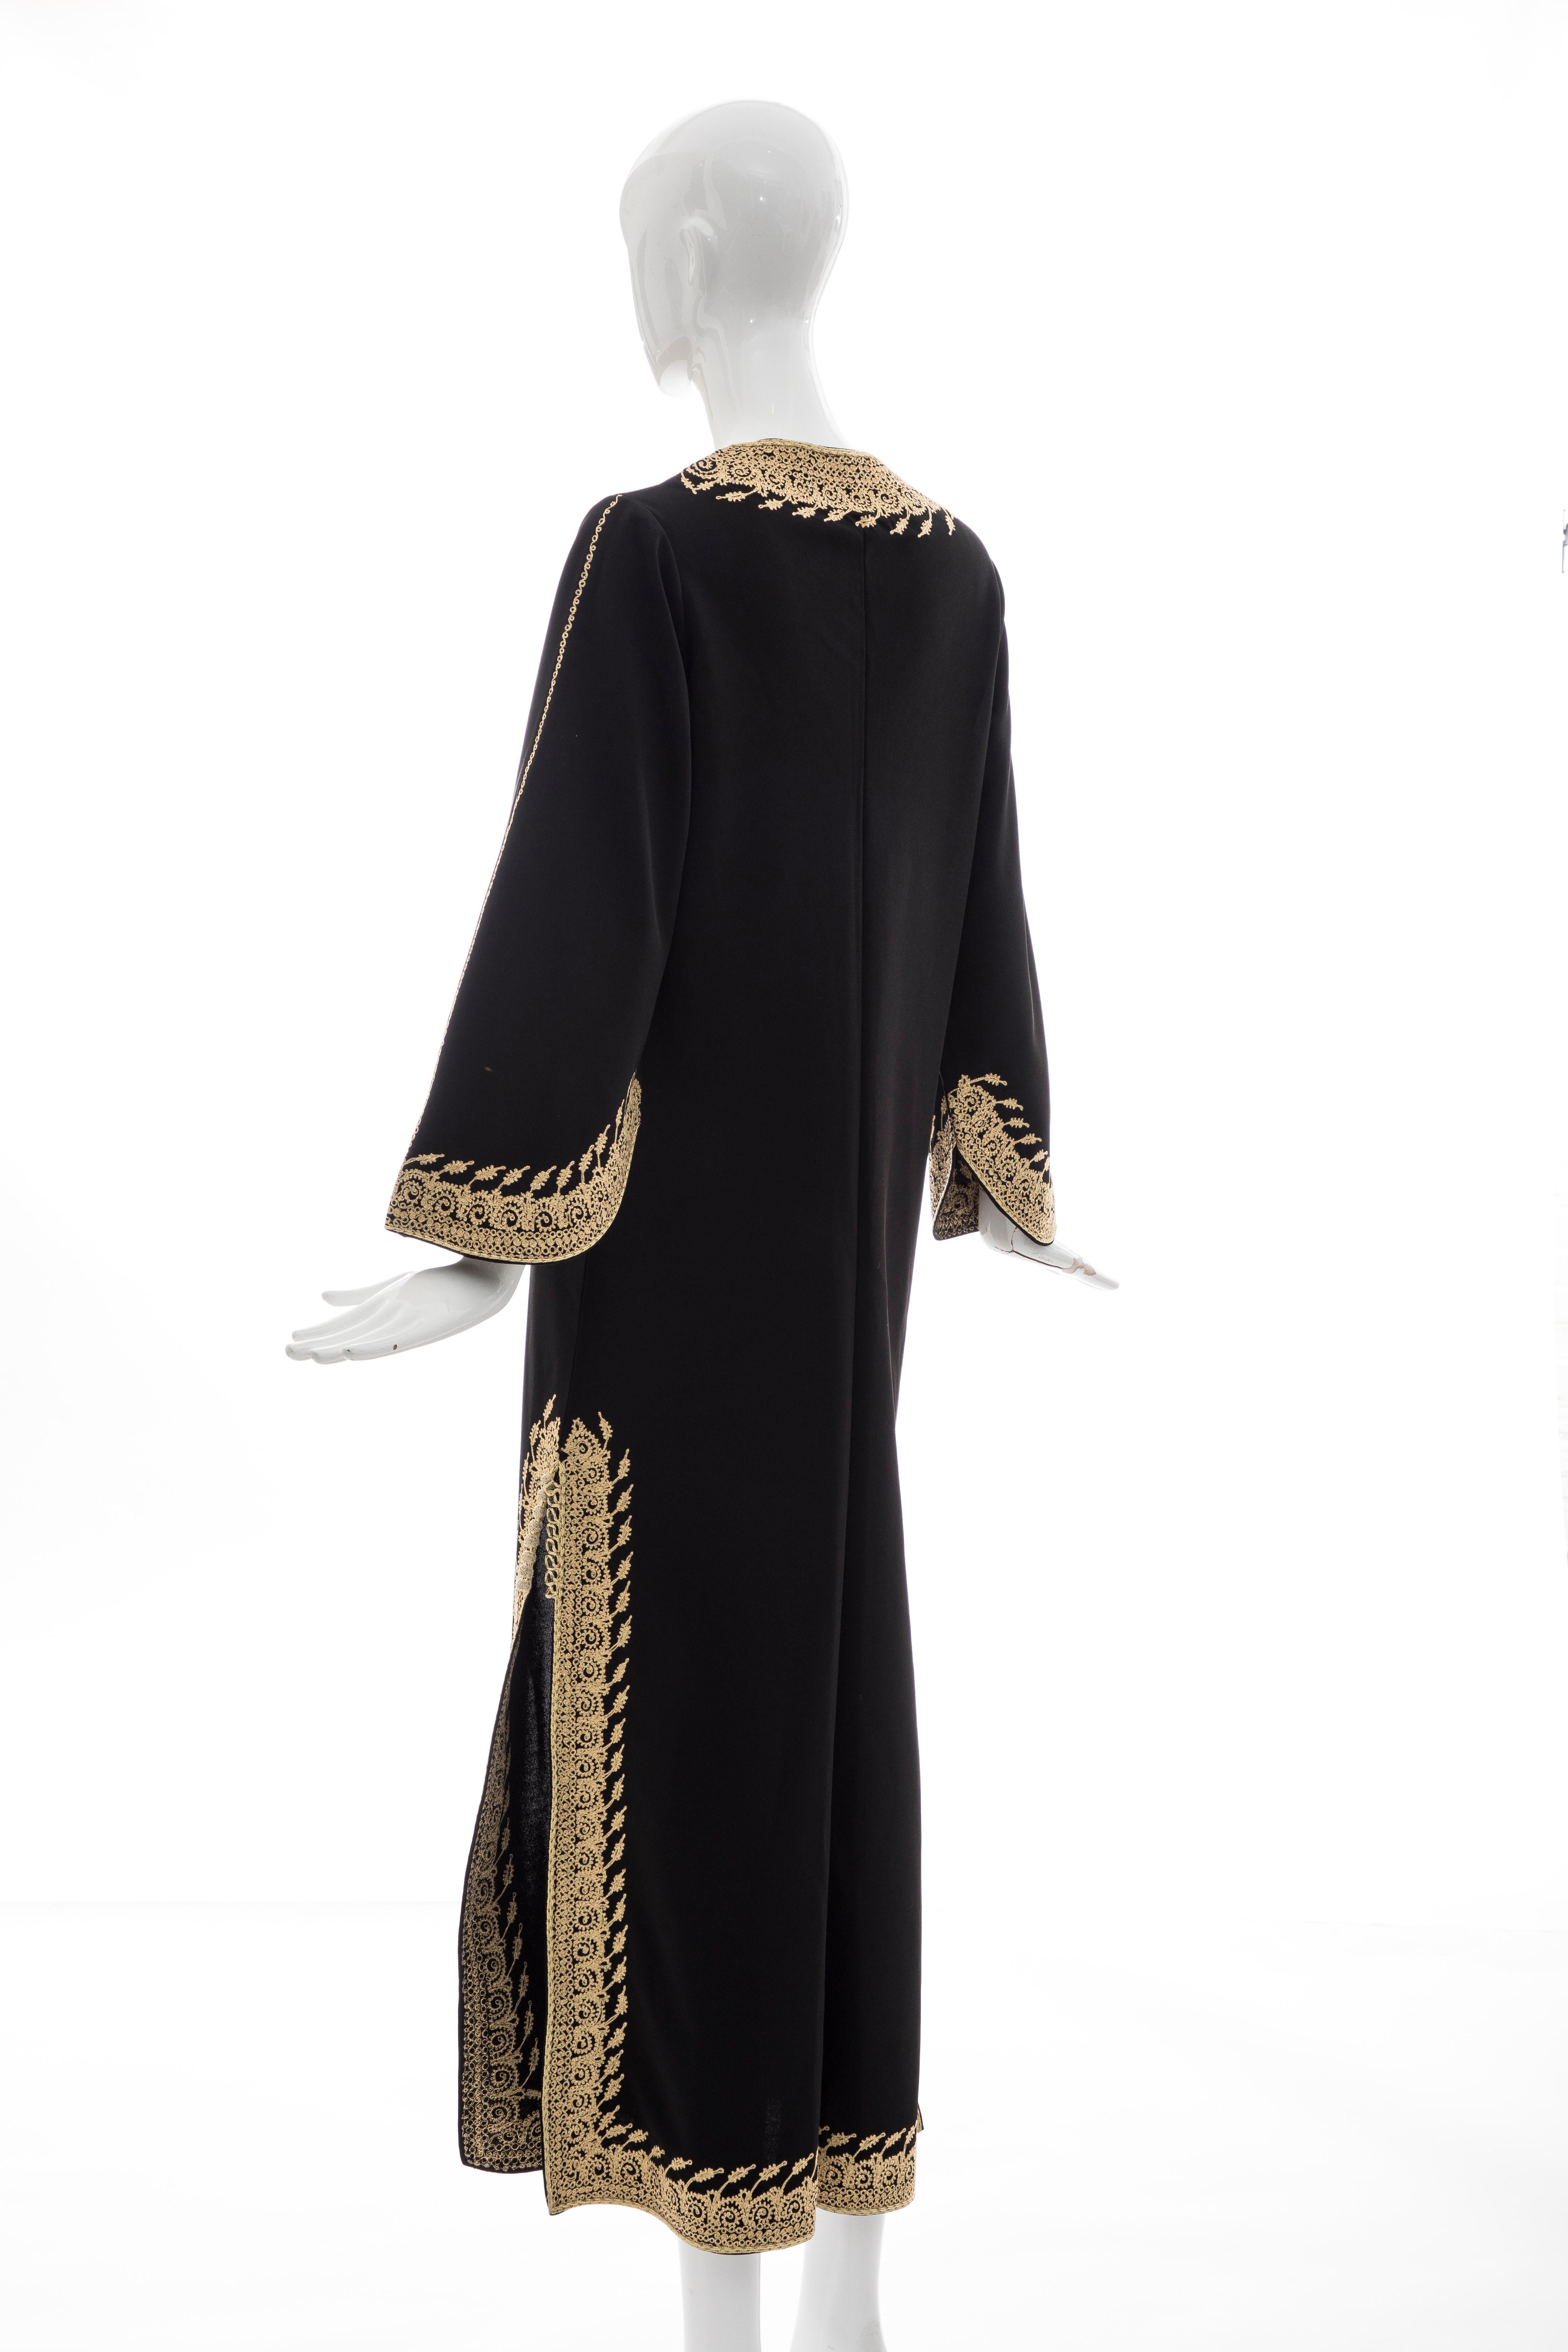 Moroccan Black Kaftan With Gold Embroidery Separate Hooded Cape, Circa 1970's 3